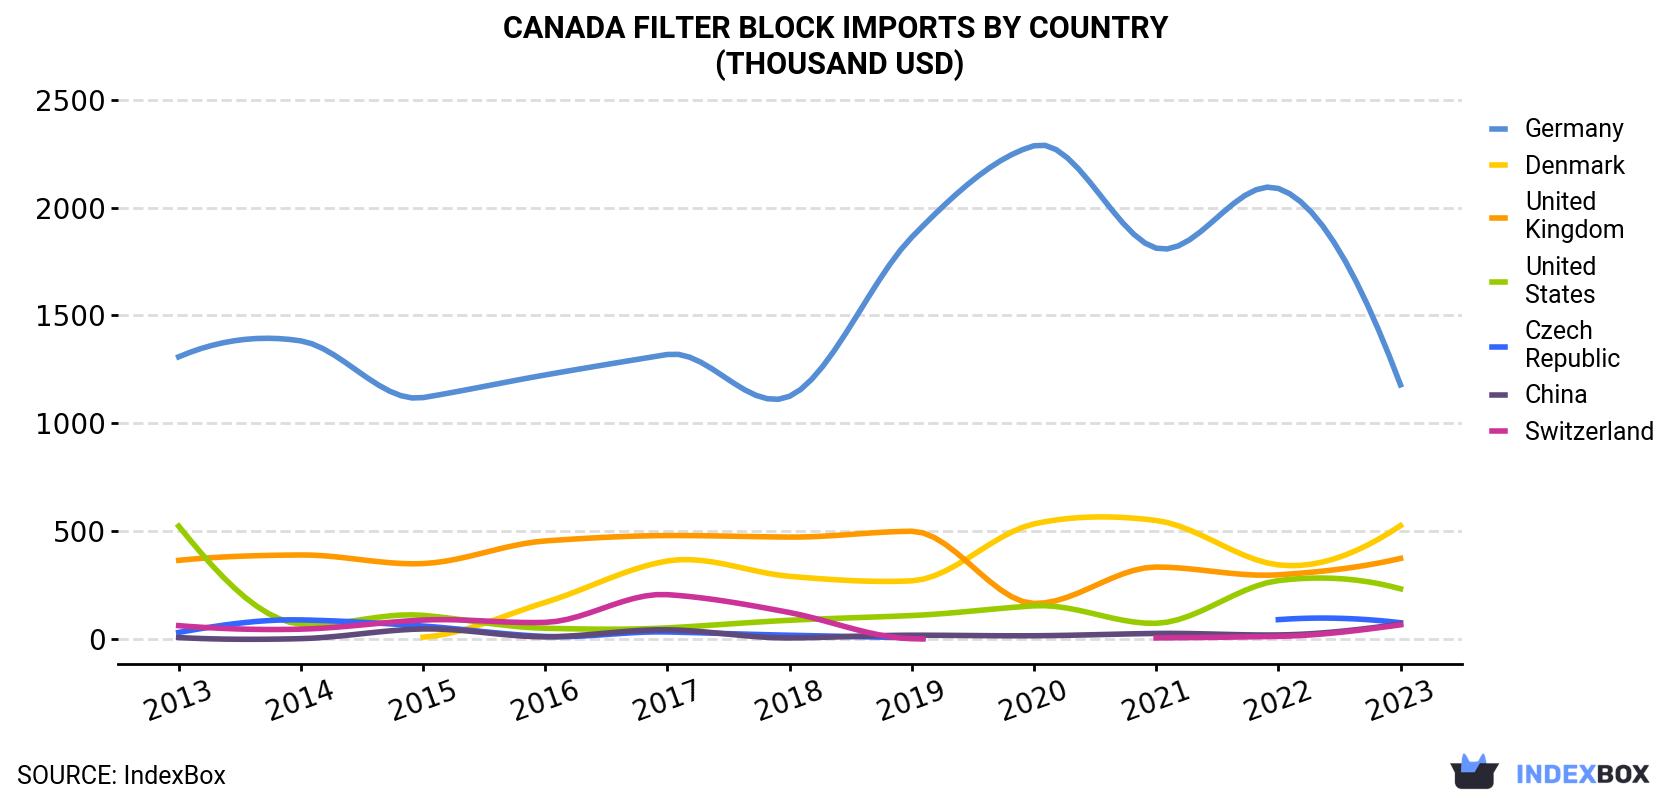 Canada Filter Block Imports By Country (Thousand USD)